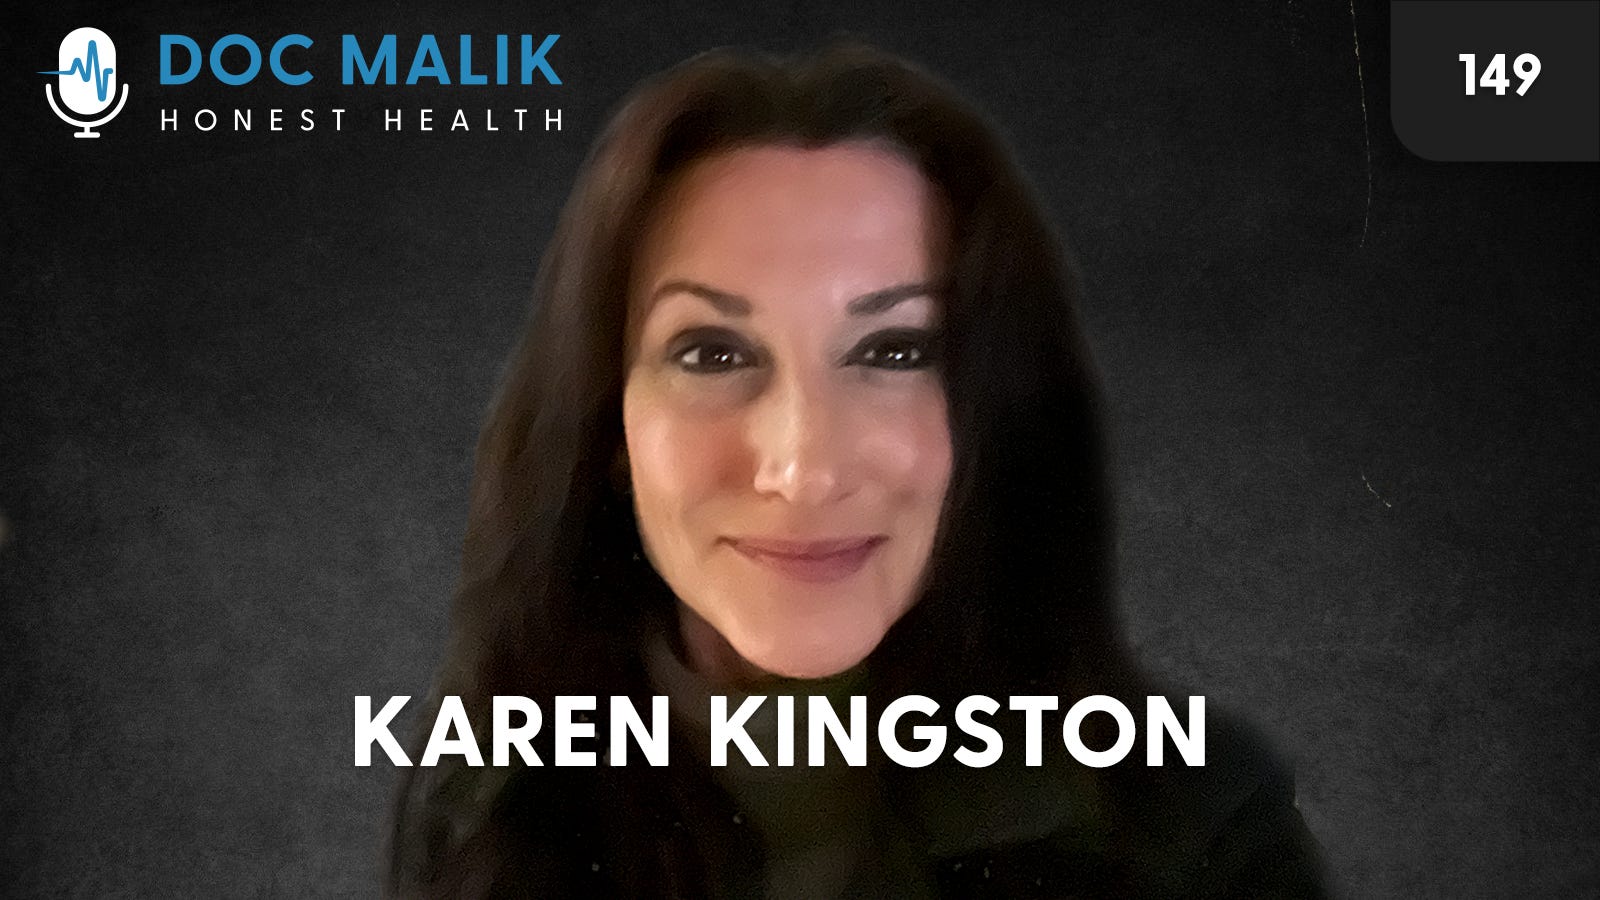 #149 - Why Karen Kingston Has A Beef With Pfizer (With Bonus Content Right At The End)